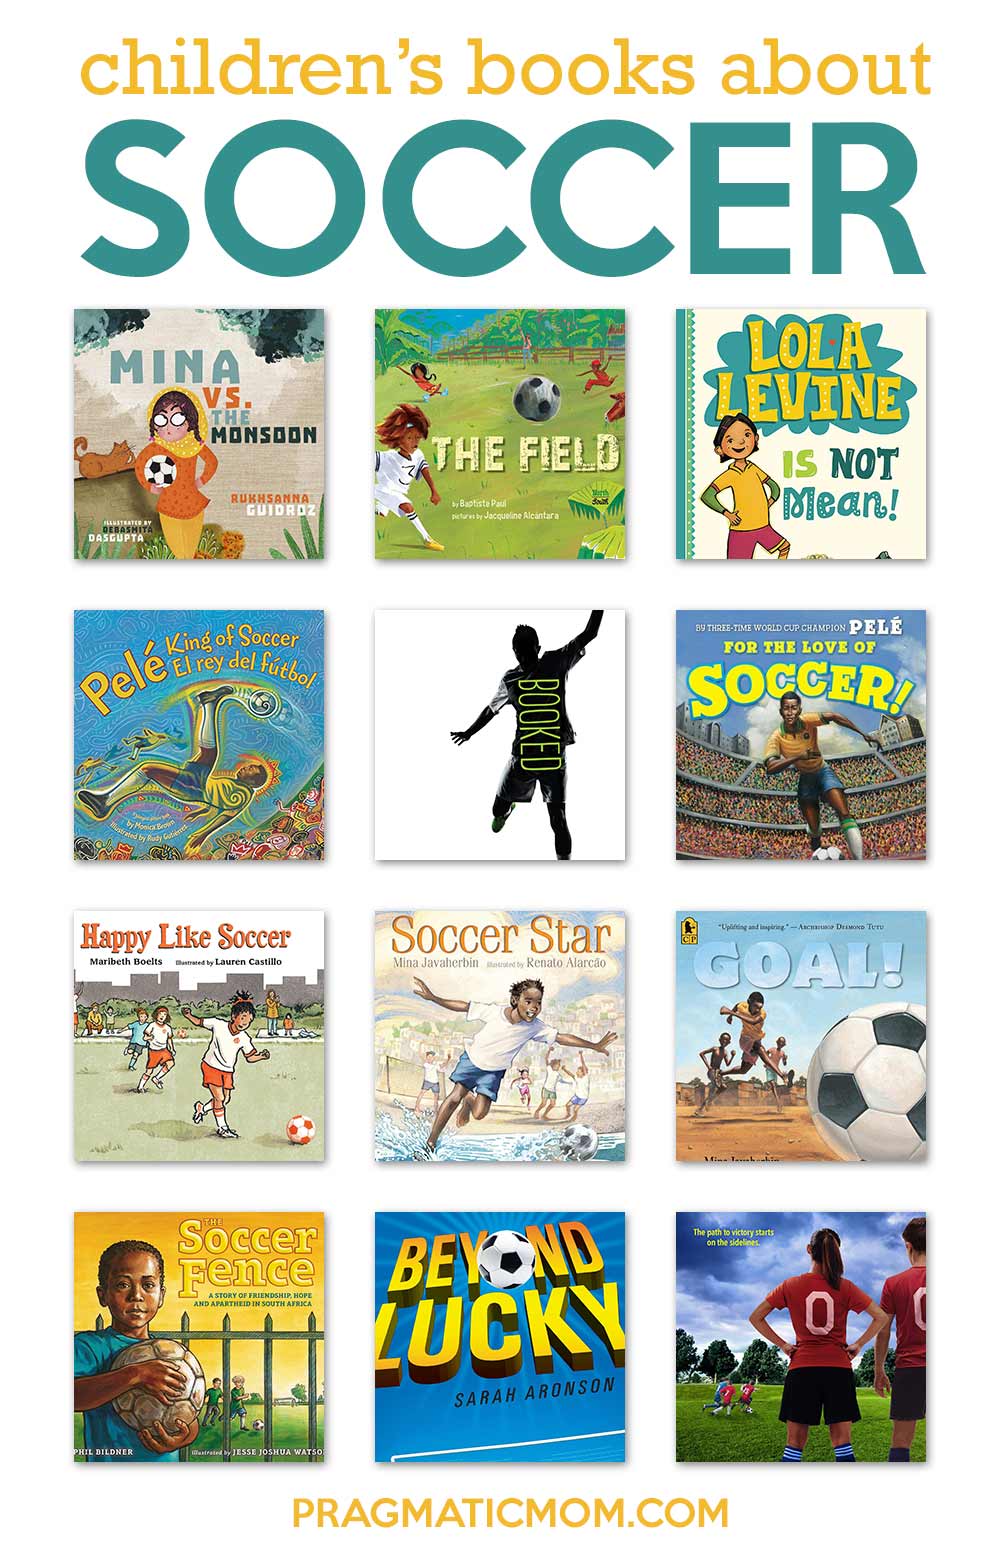 Children's books about soccer